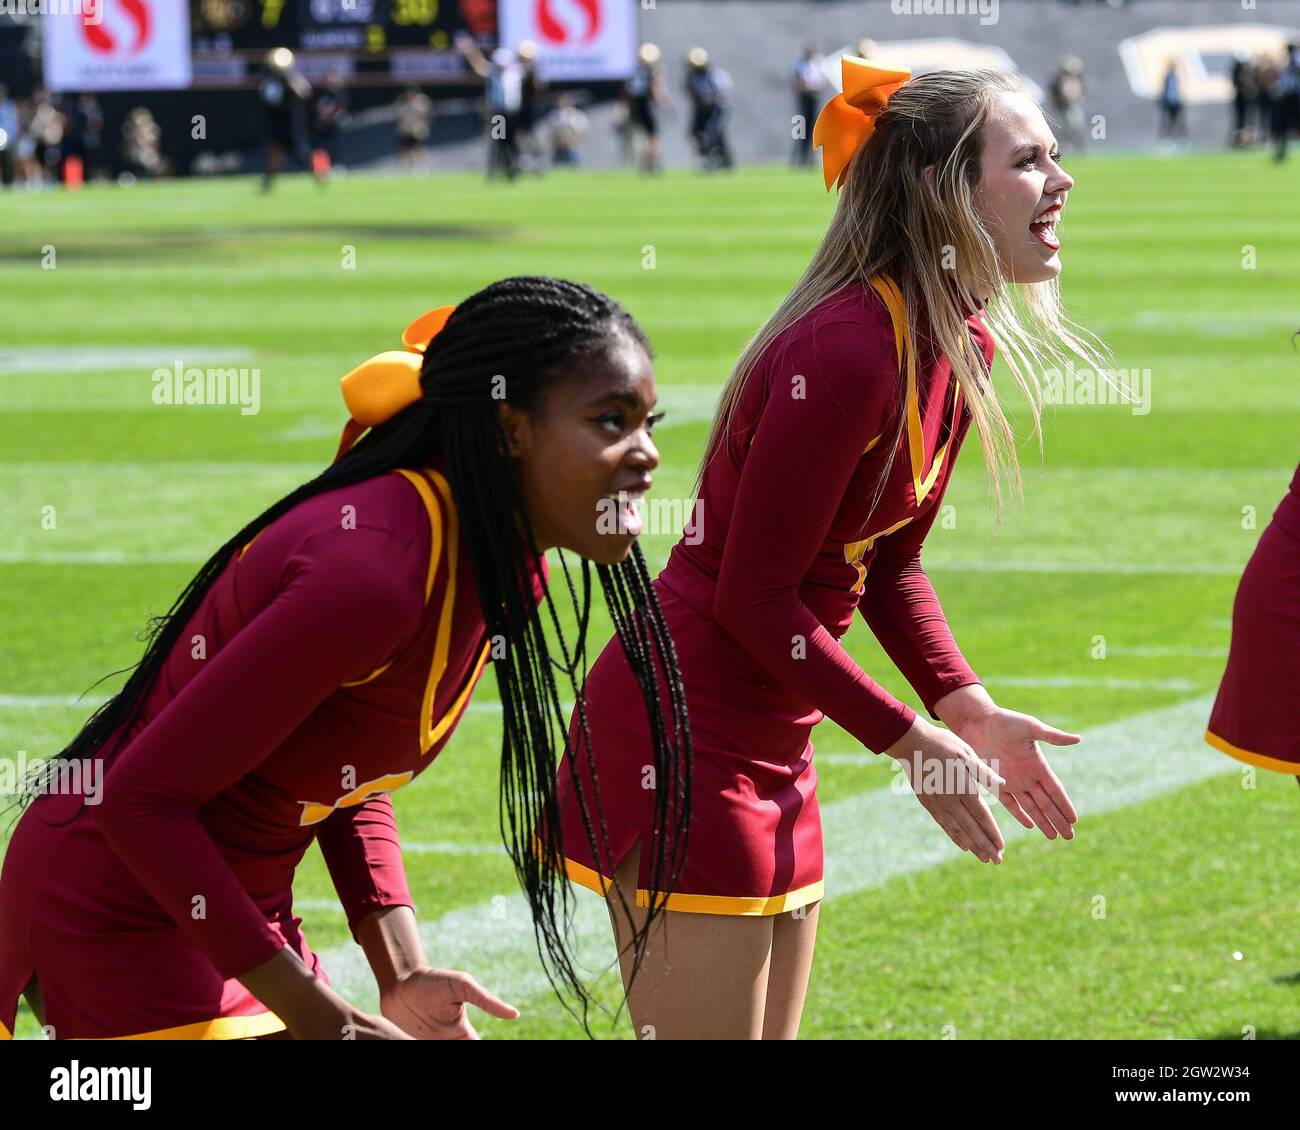 Boulder, CO, USA. 02nd Oct, 2021. USC cheerleaders urge on the visiting fans during the football game between Colorado and USC at Folsom Field in Boulder, CO. Colorado lost 37-14. Derek Regensburger/CSM/Alamy Live News Stock Photo